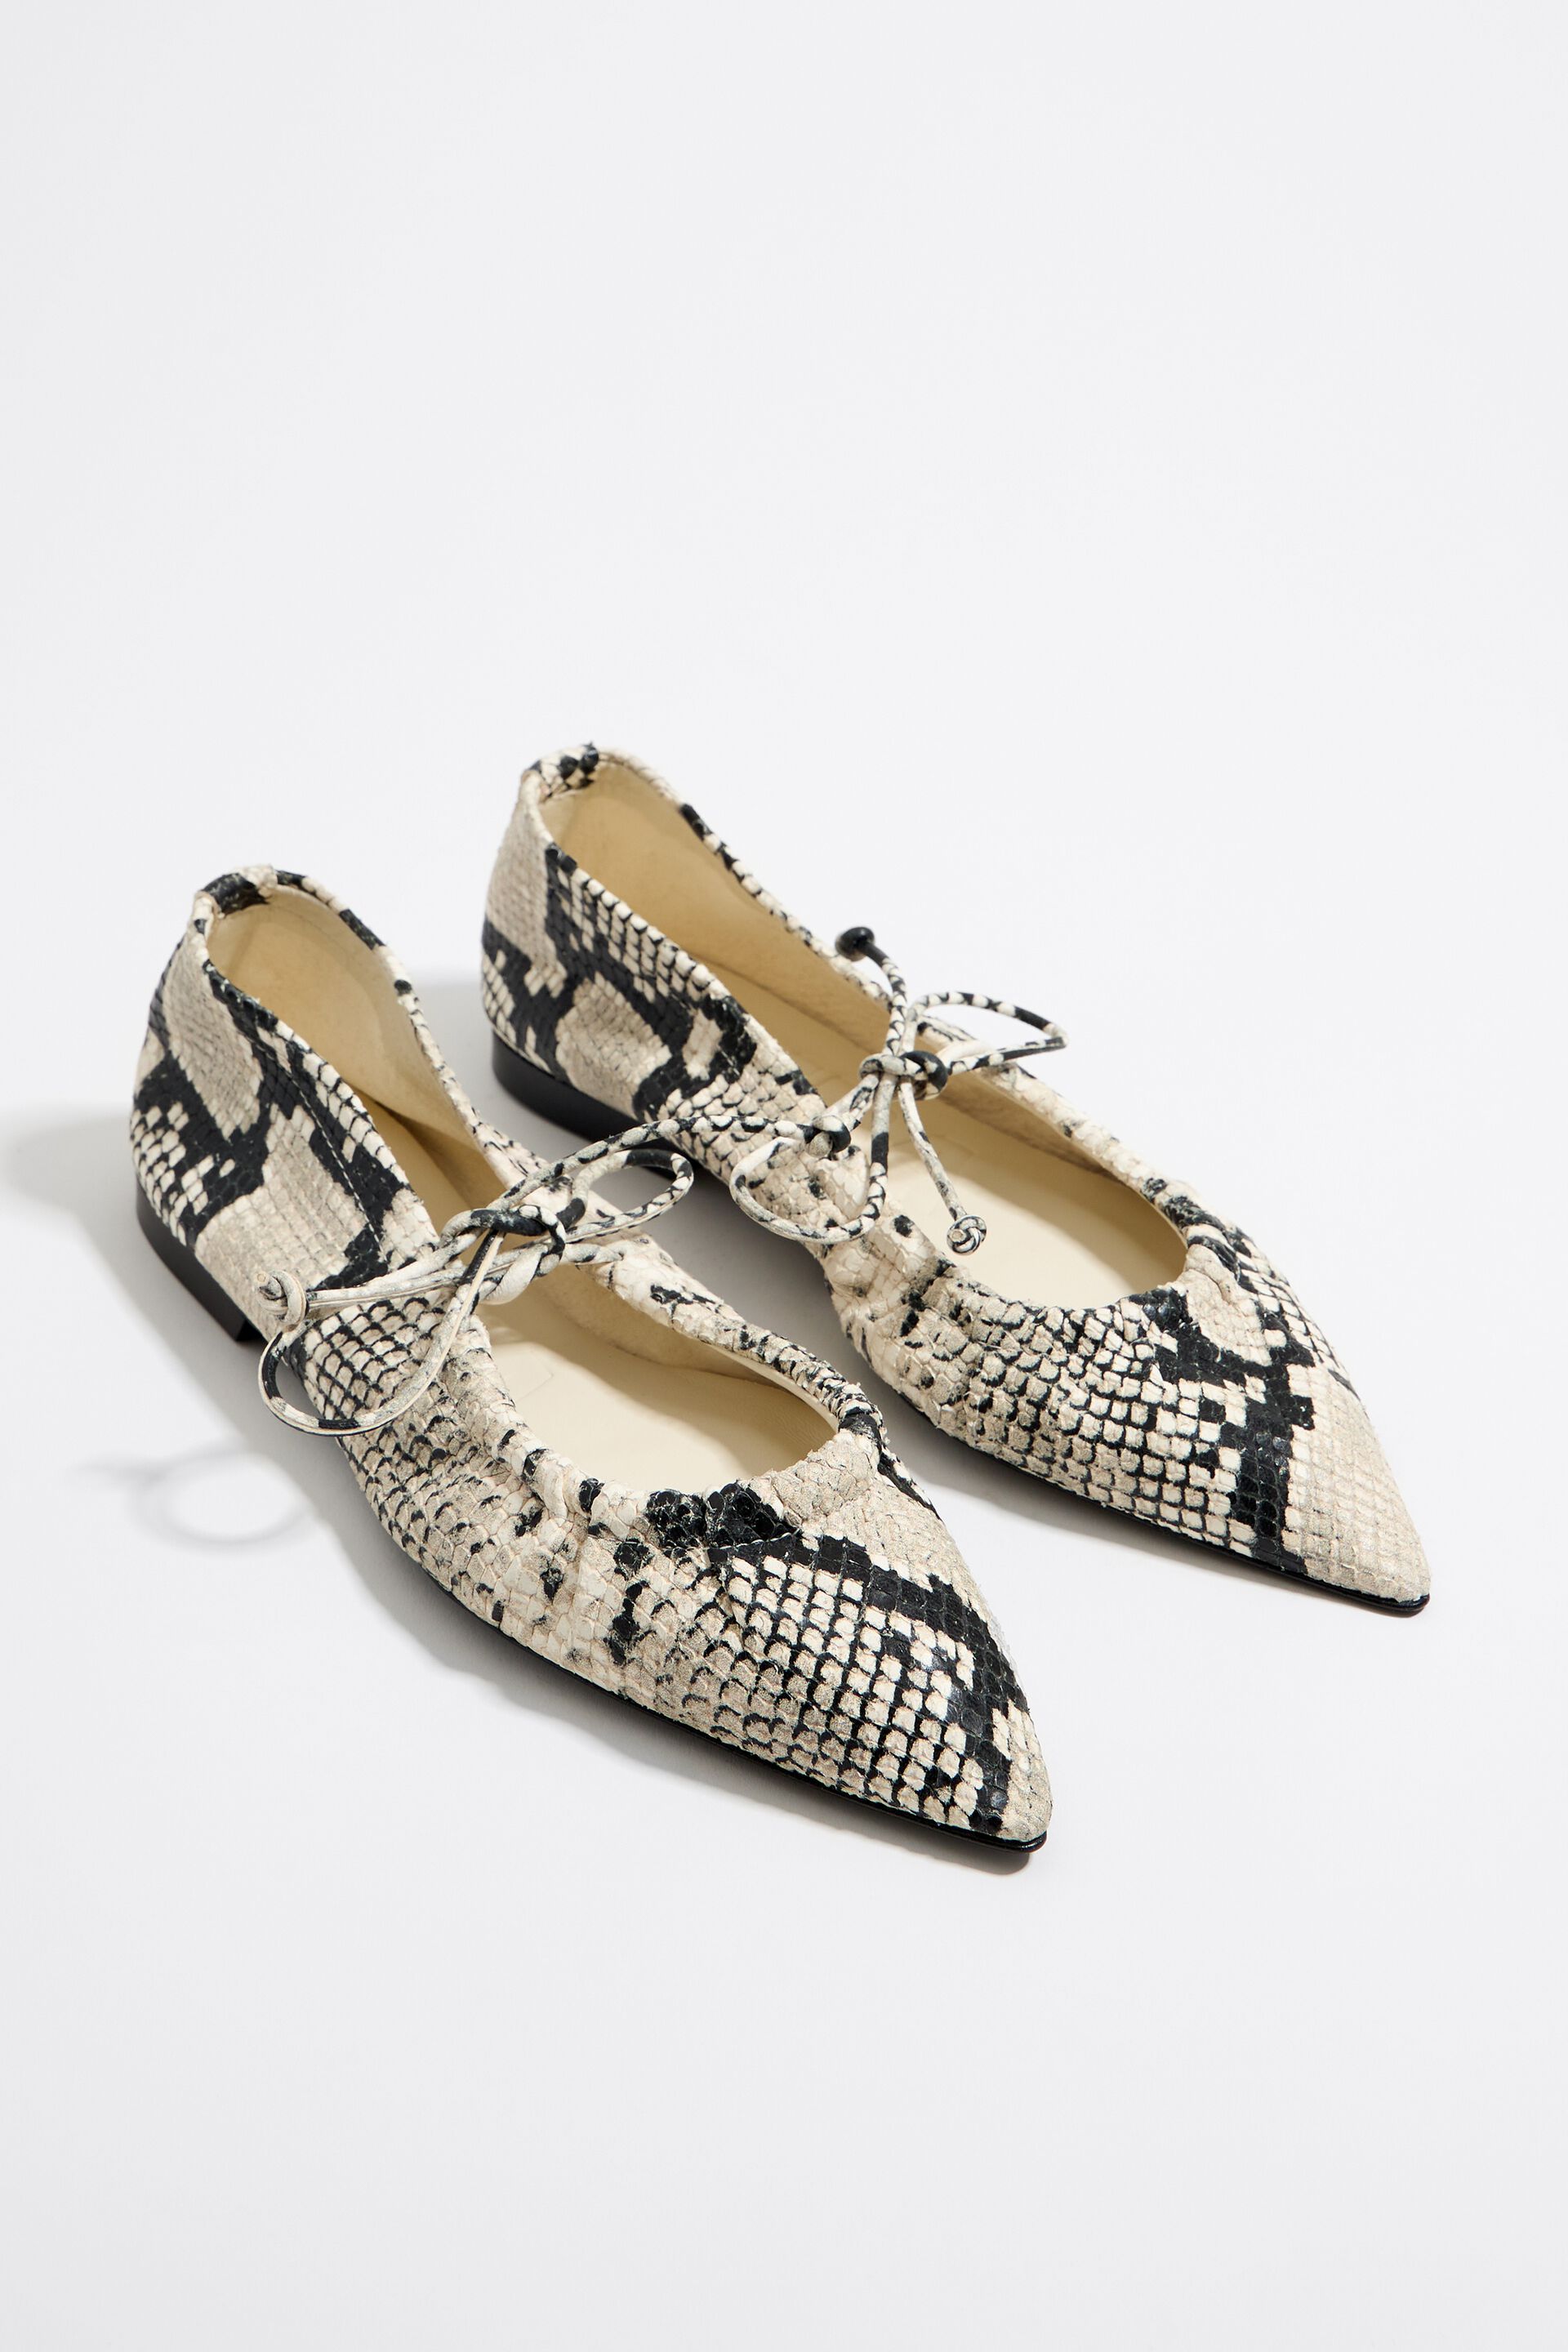 Lucky Brand, Shoes, Ameena Ballet Flats Chinchilla Slither Snake Print  Leather 95